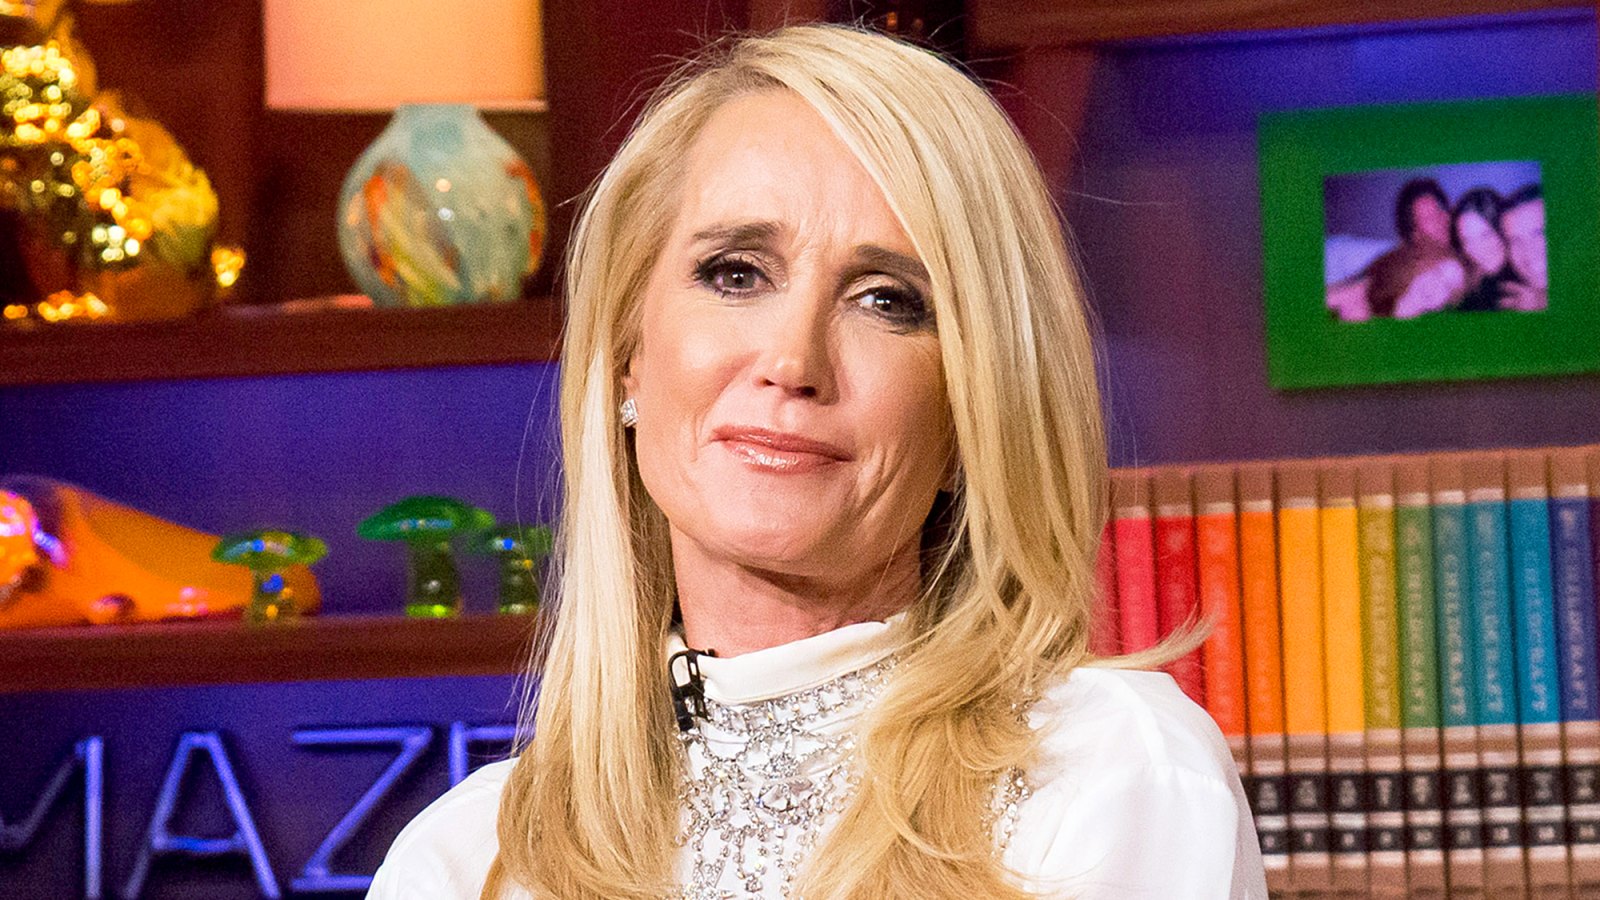 Kim Richards on ‘Watch What Happens Live‘